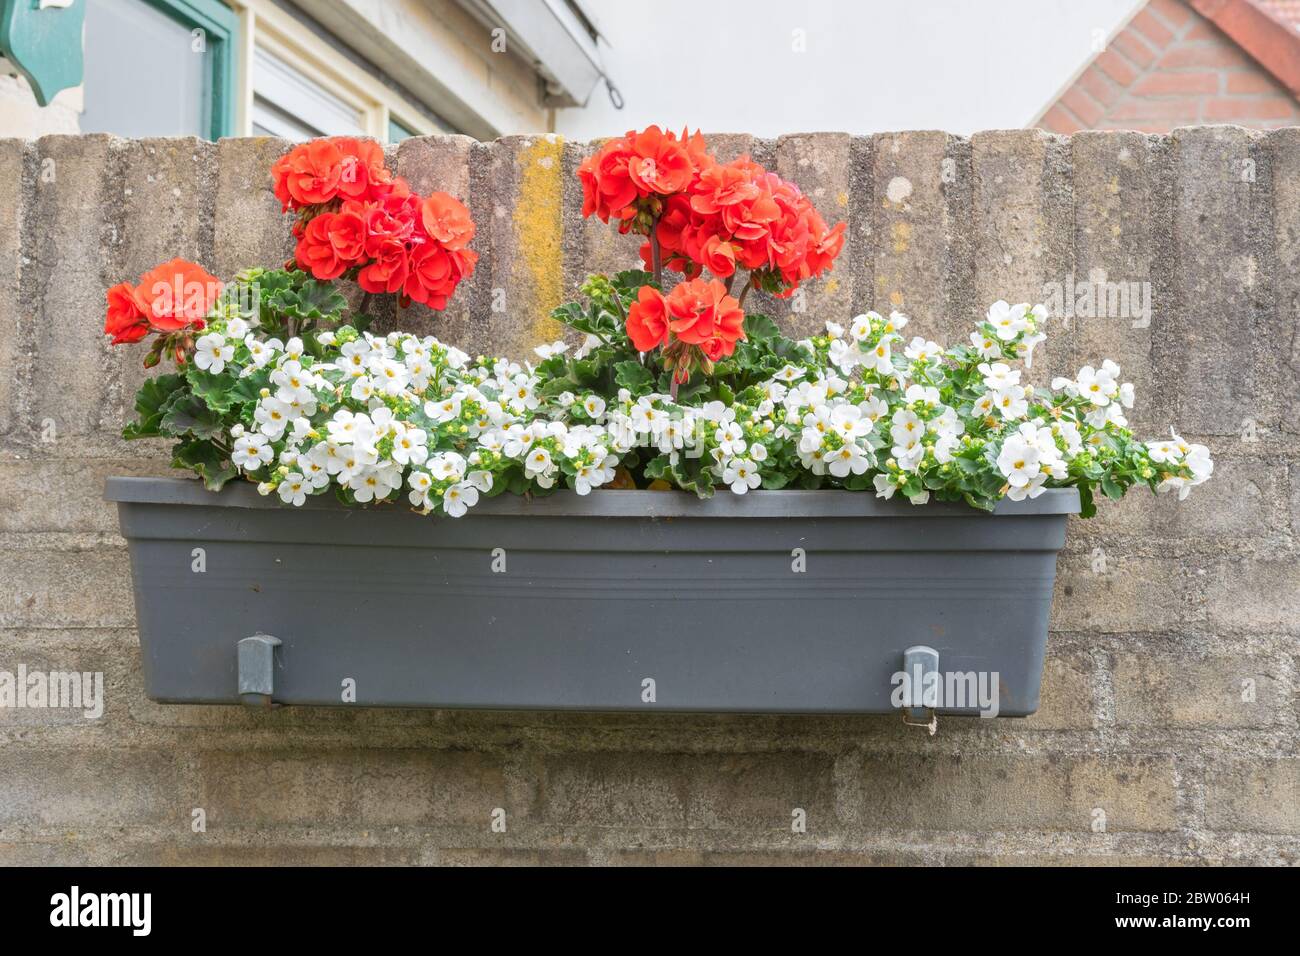 Red-flowering Pelargonium (Geranium) and white-flowering Bacopa (Sutera cordata) in a flower box on a wall in an urban garden Stock Photo